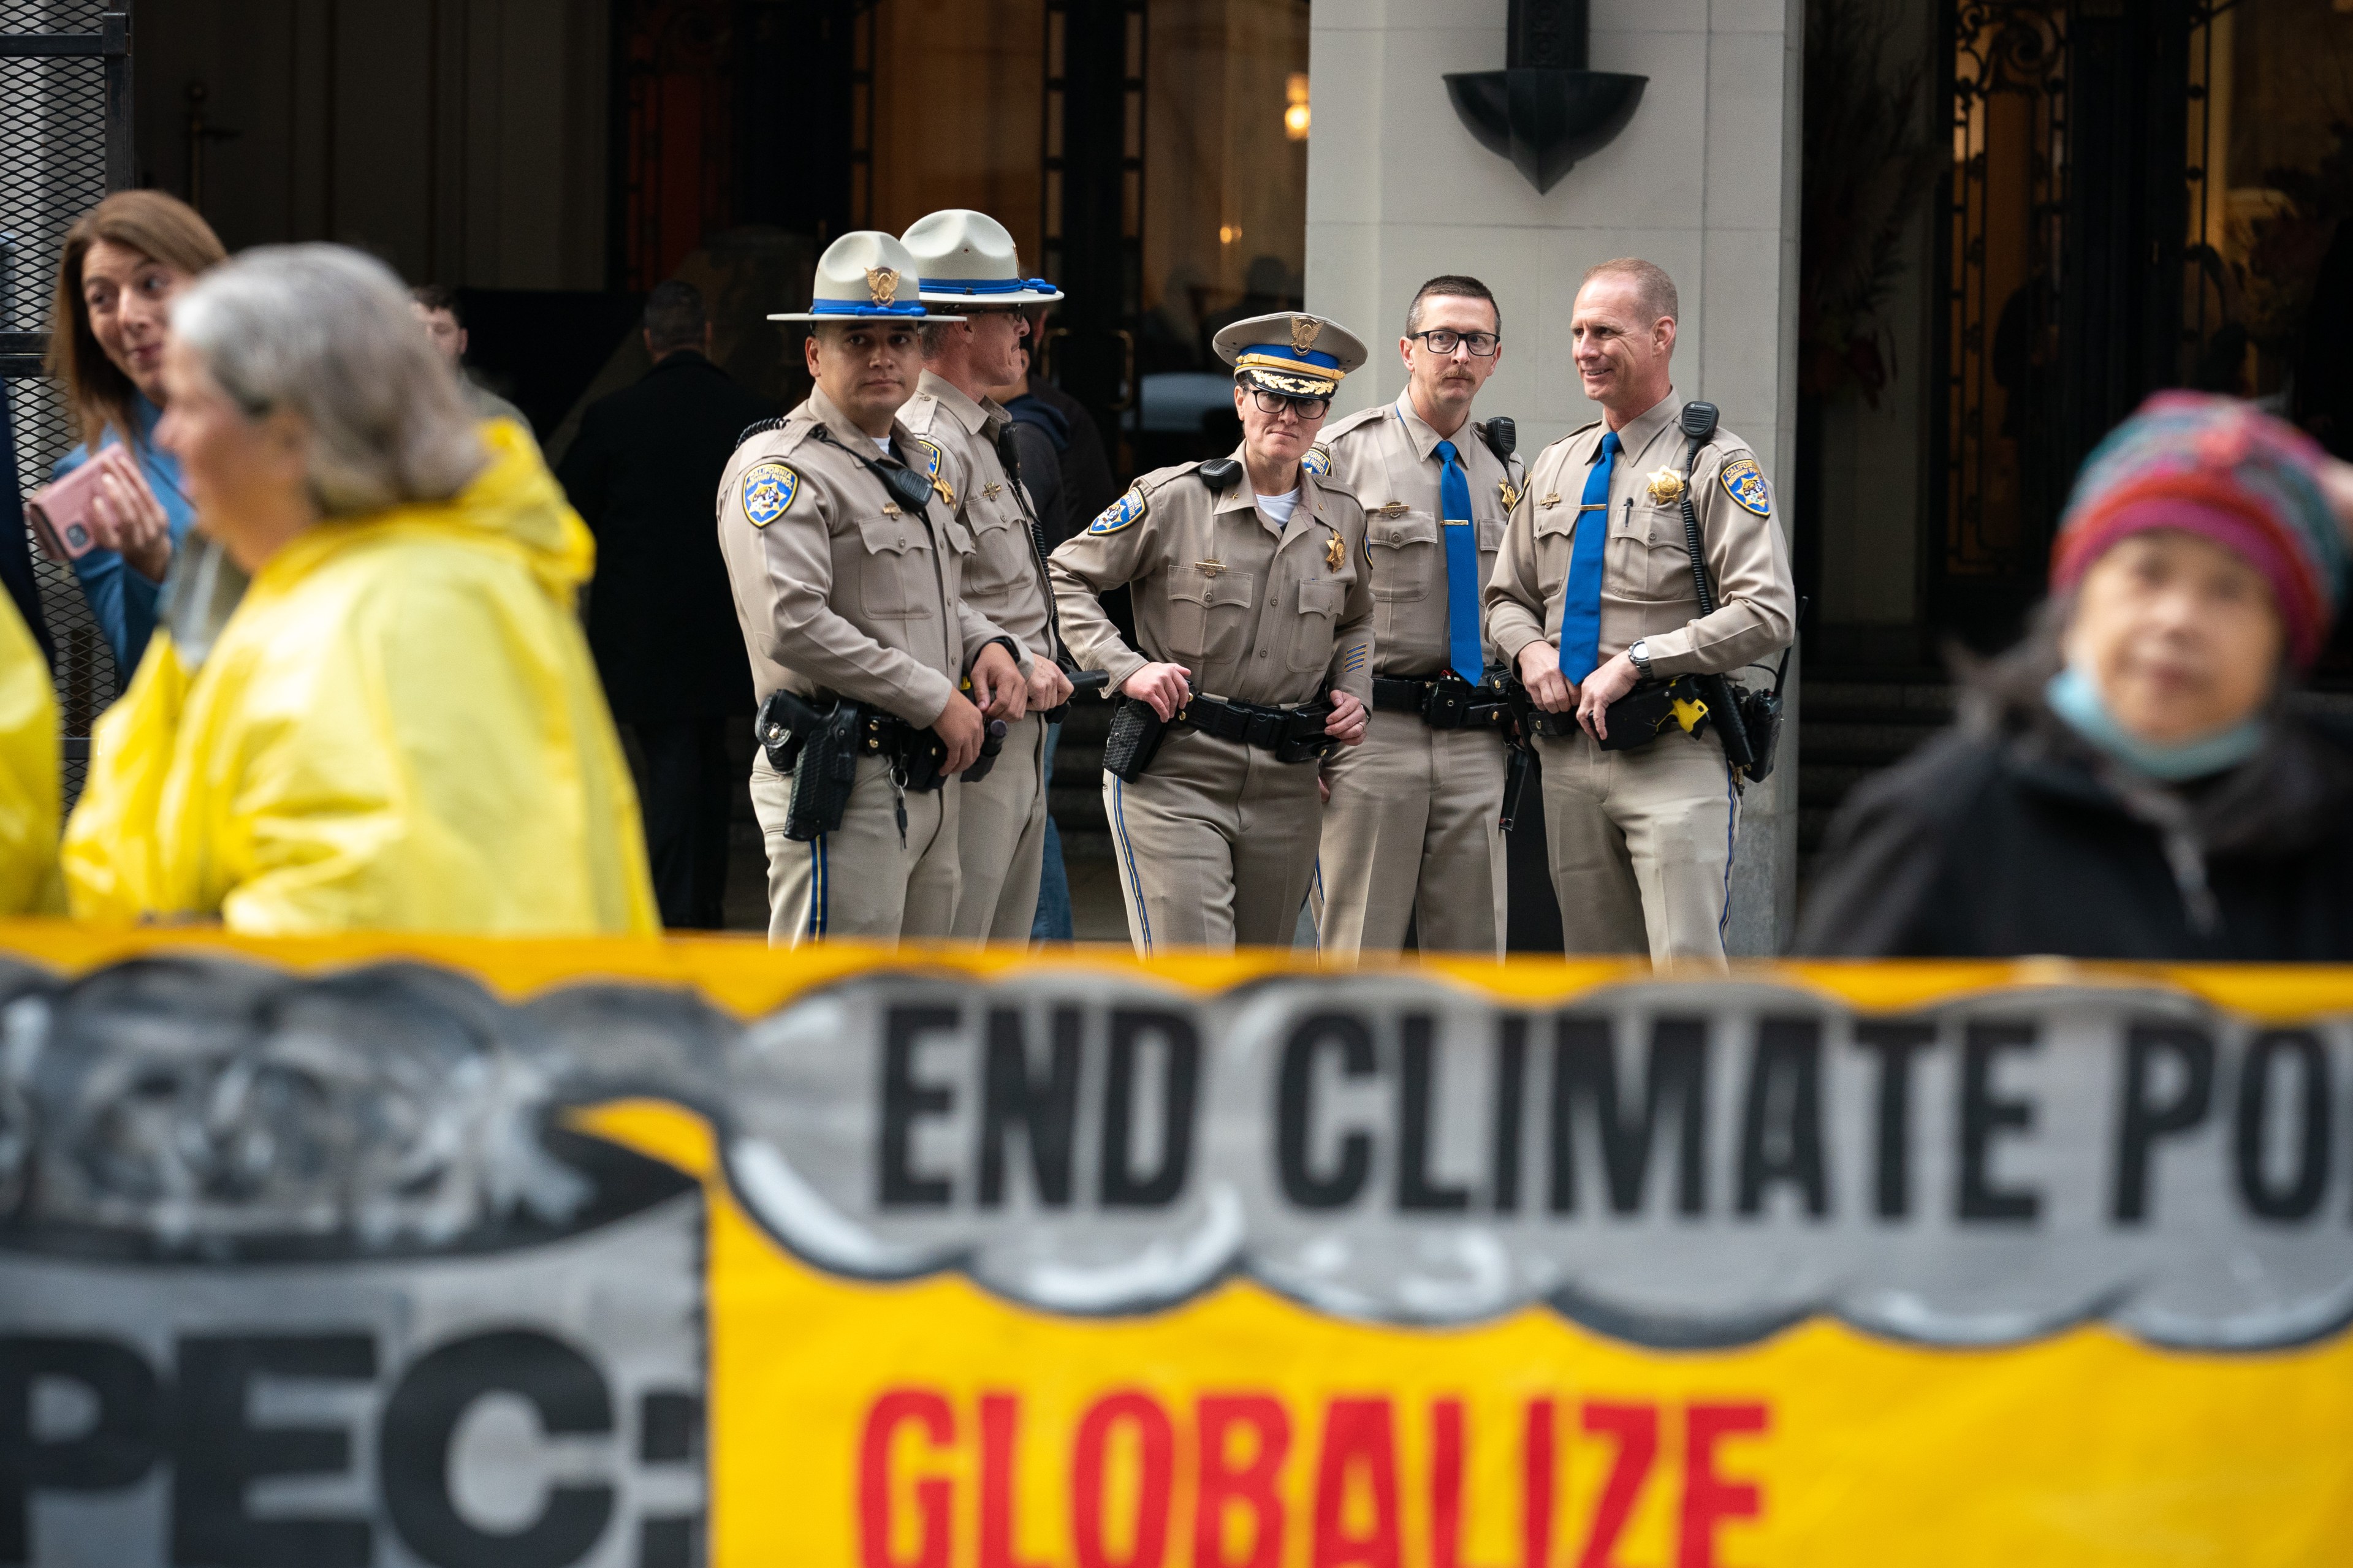 Five California Highway Patrol officers look in the distance of climate activists holding a banner.